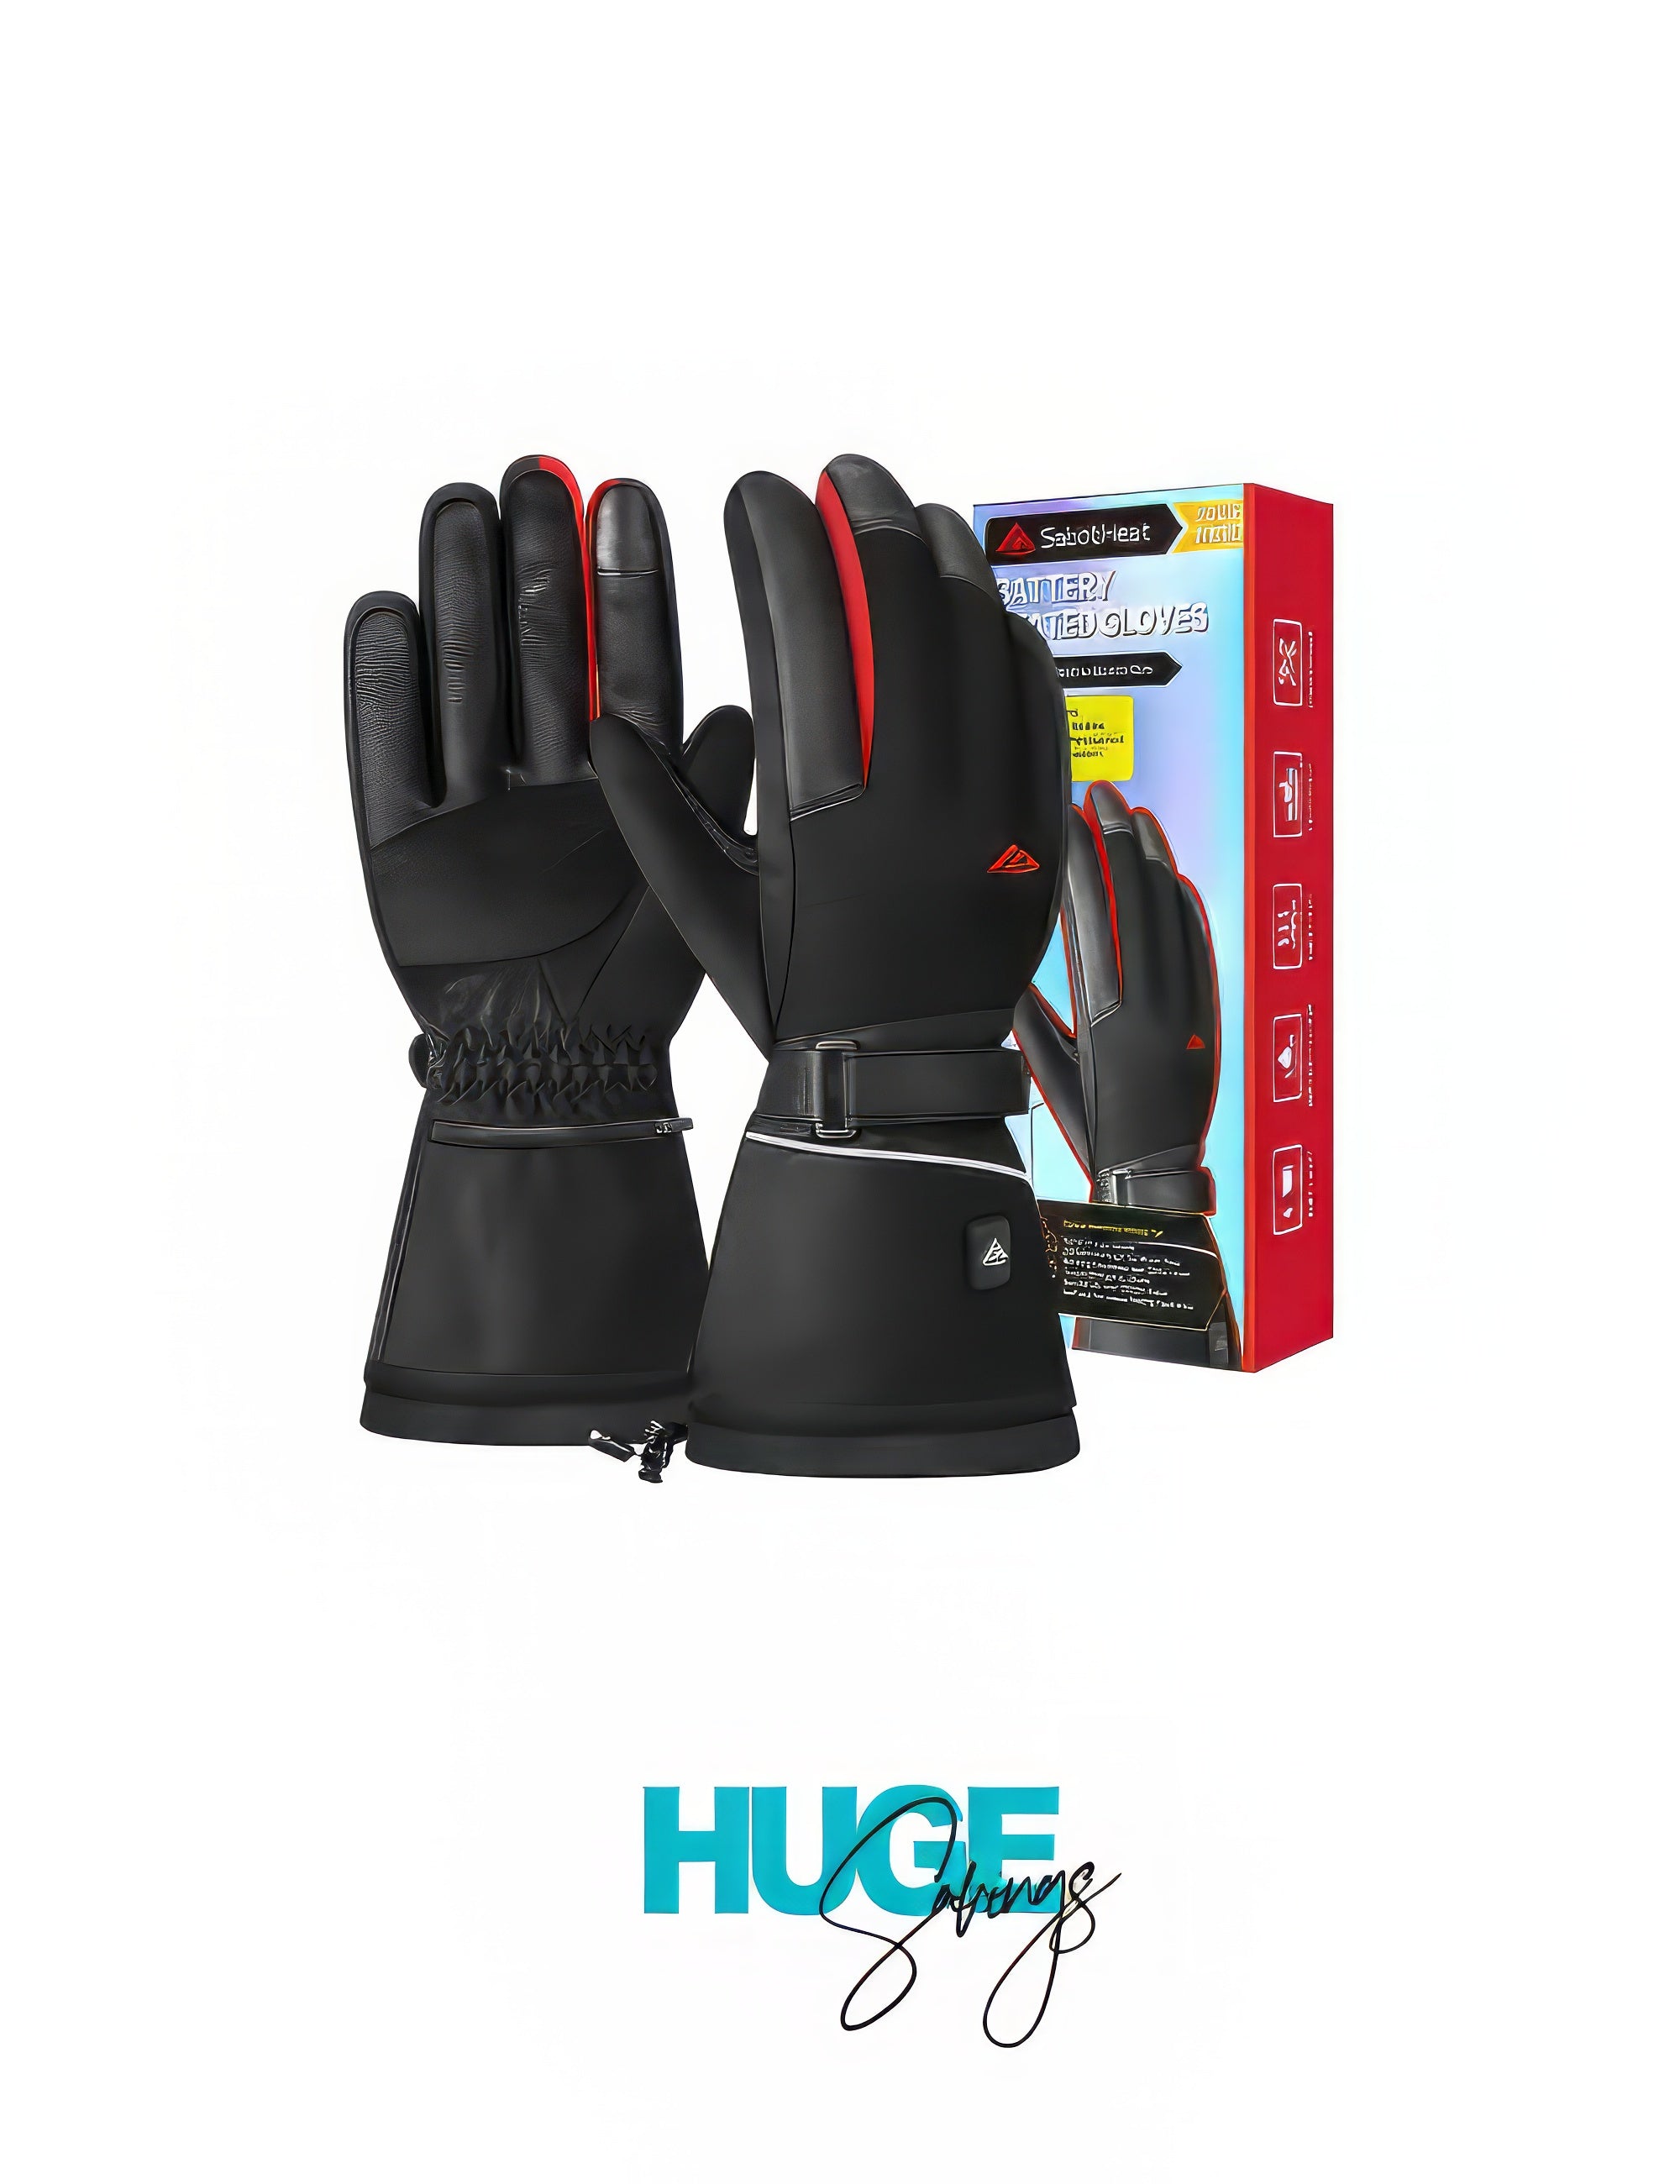 SabotHeat Battery Heated Gloves - Electric Heated Gloves for Men (XL)